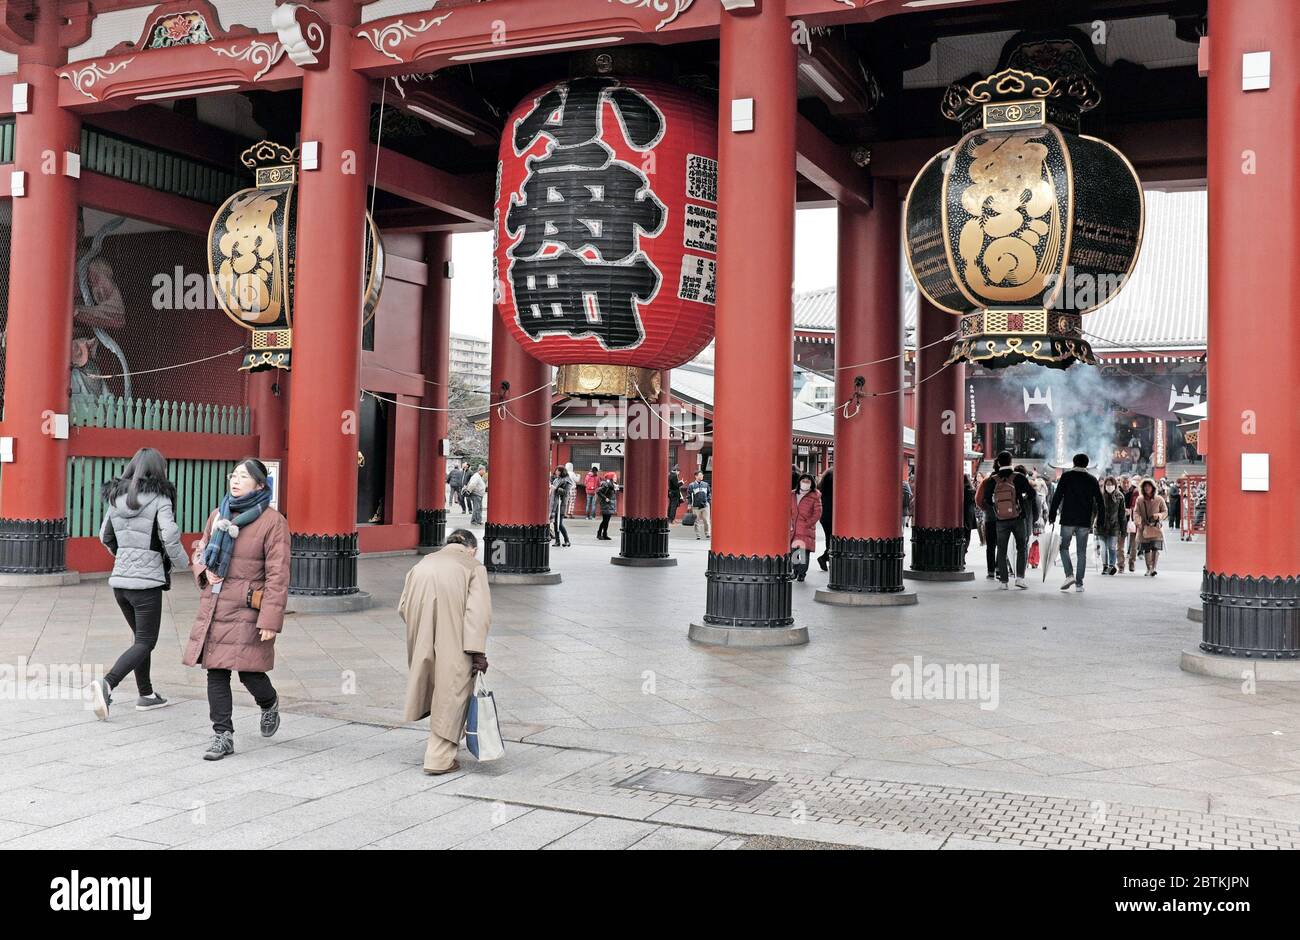 The kaminarimon, or thunder gate, with its large lanterns is one of the entrances to the Sesoji Temple, an ancient Buddhist Temple, in Asakusa, Japan. Stock Photo